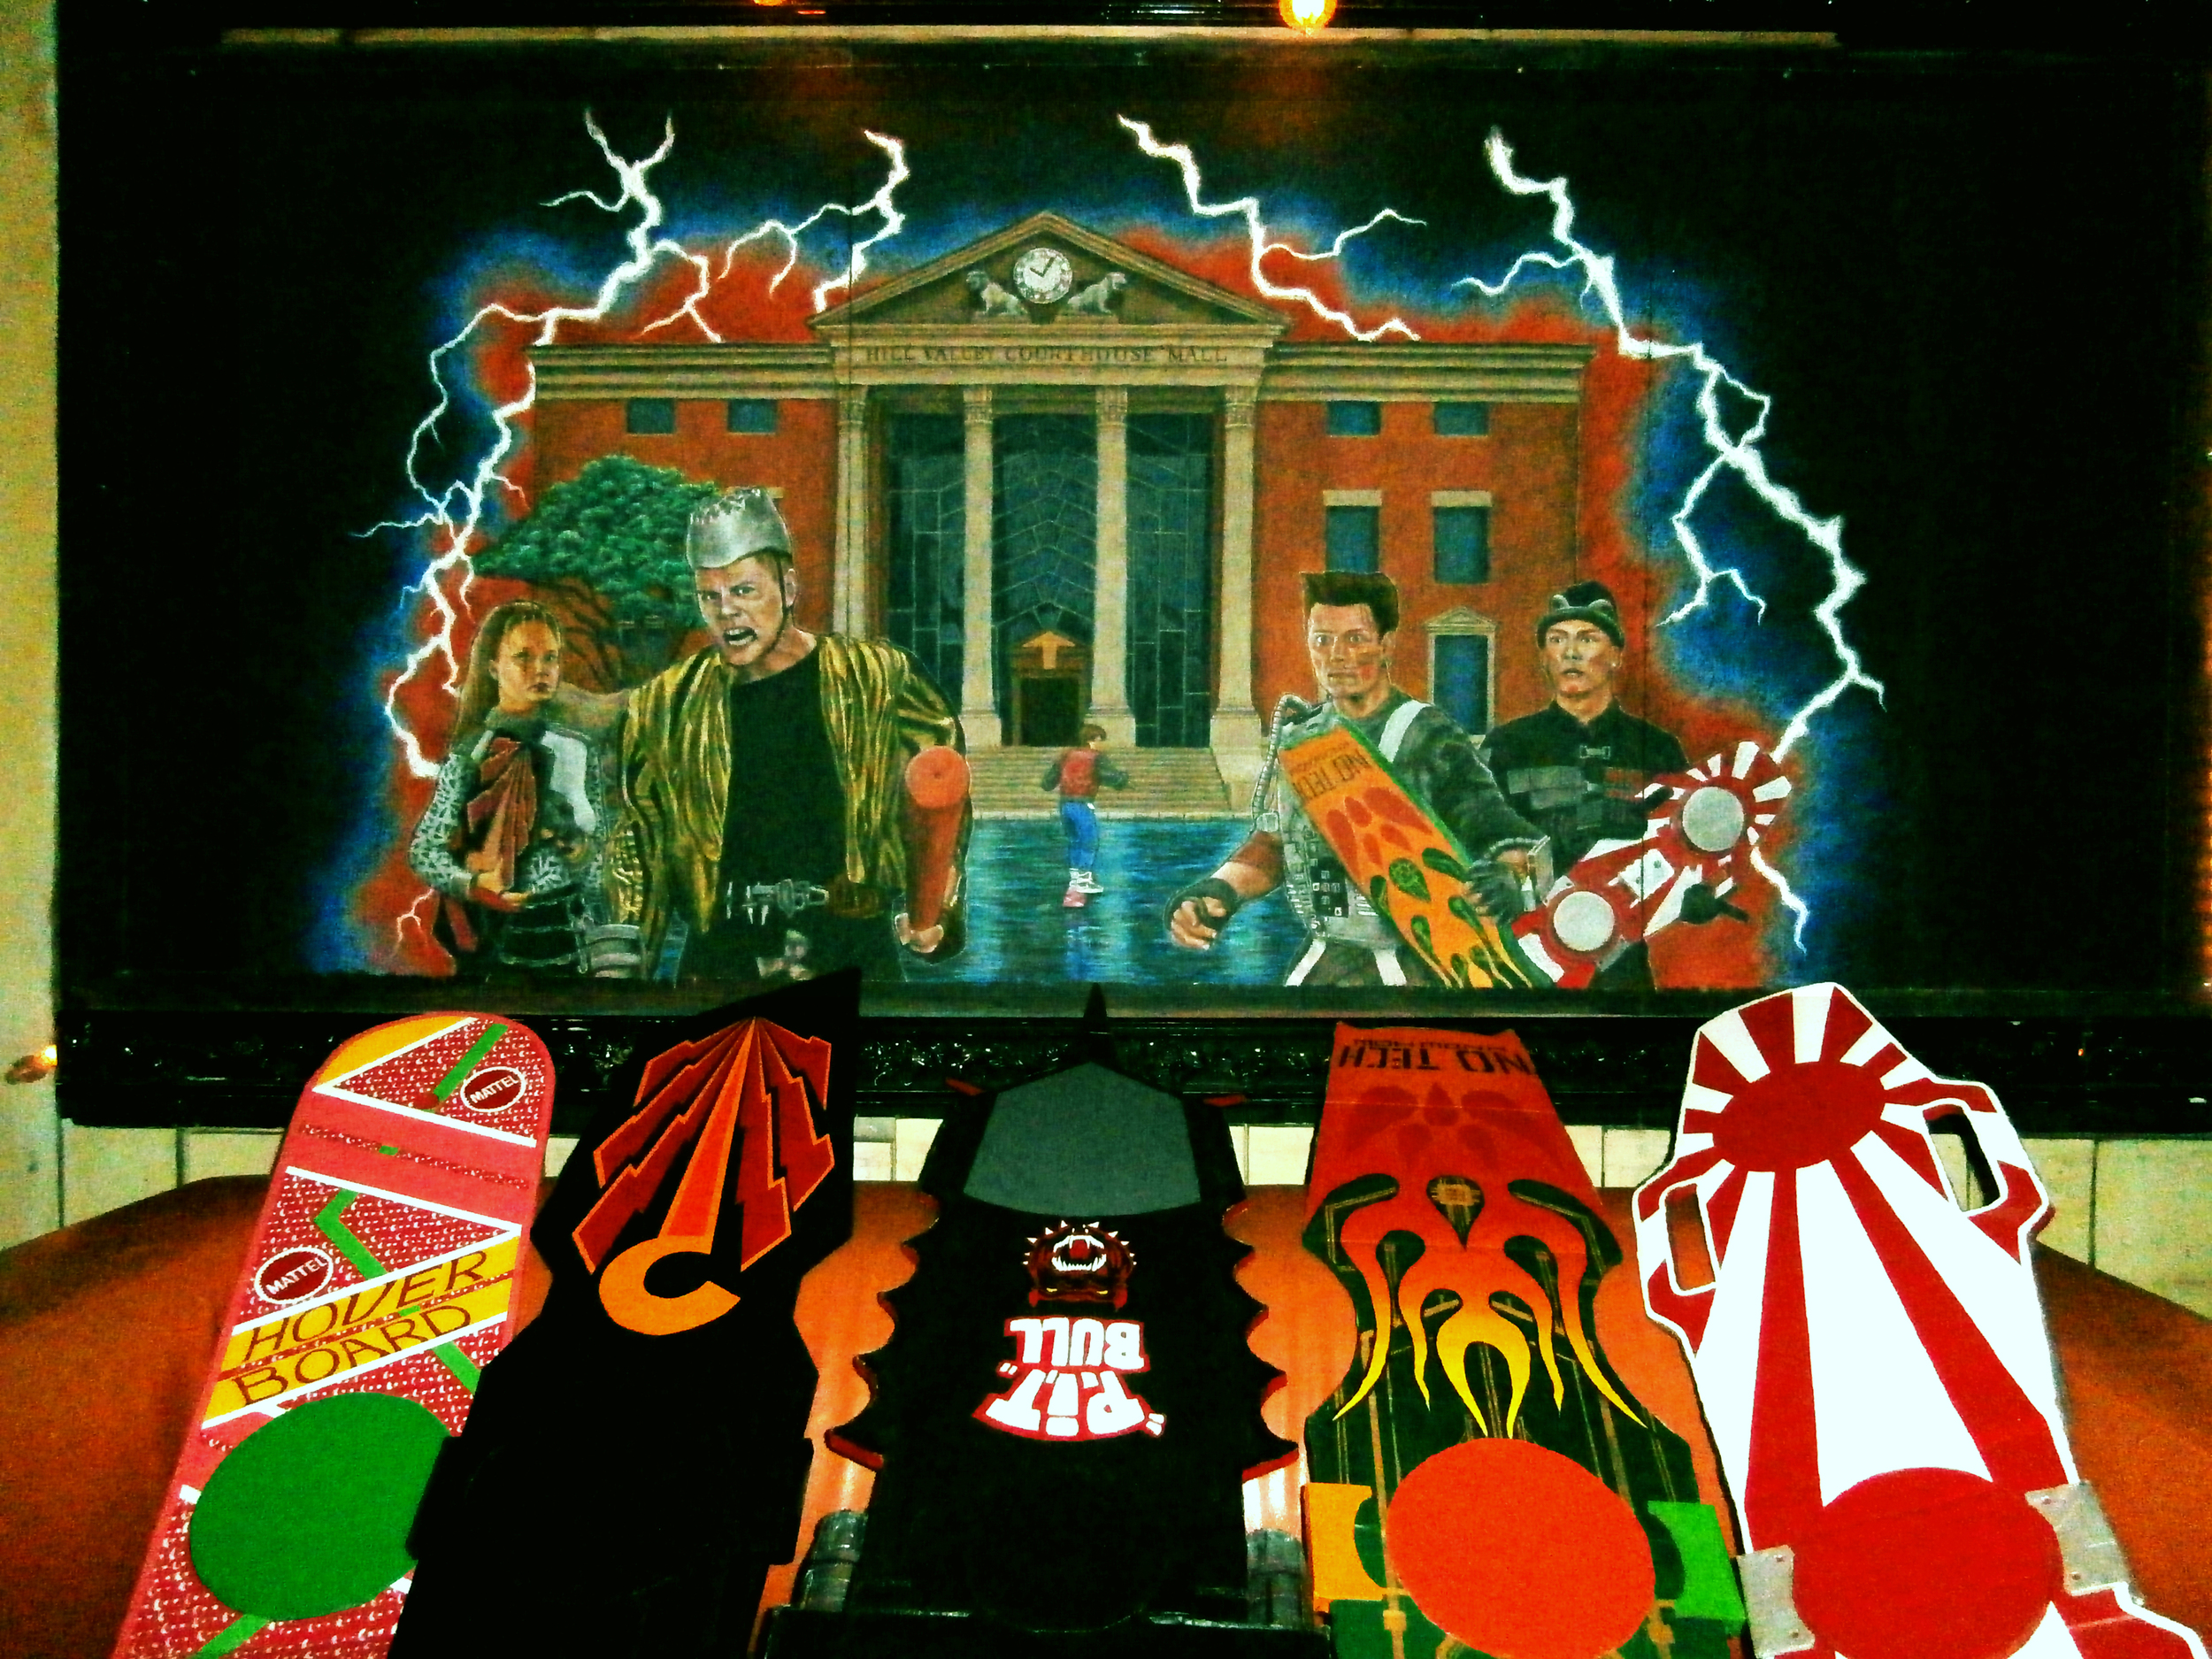 Back To The Future 2 Mural (with homemade hoverboards